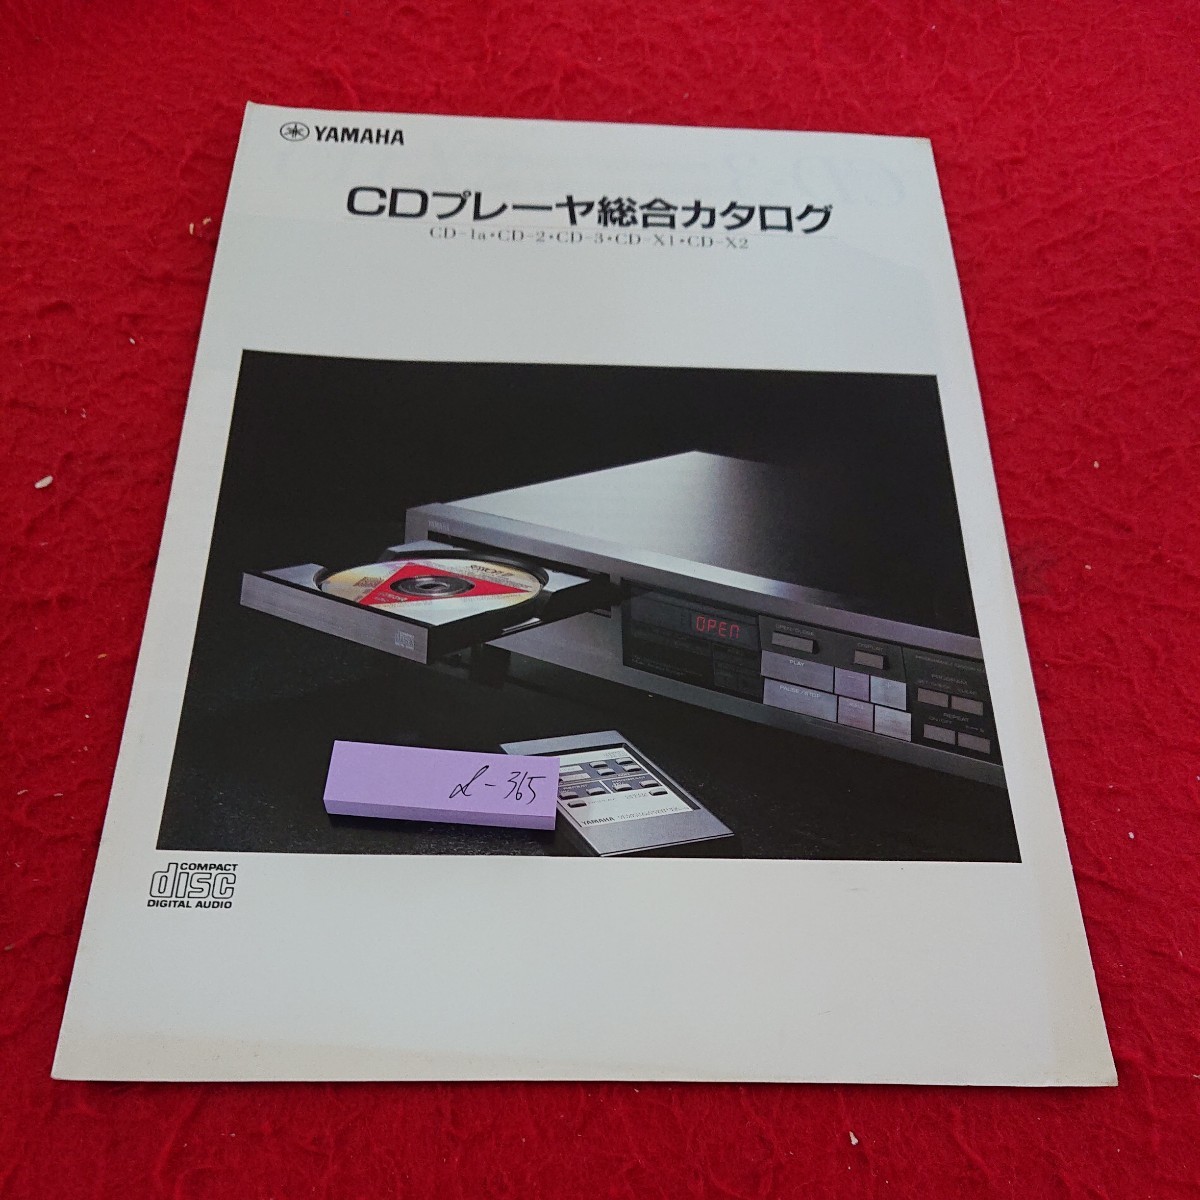 d-365 CD player general catalogue CD-1a CD-2 CD-3 CD-X1 CD-X2 Yamaha 1985 year issue compact disk digital audio *9